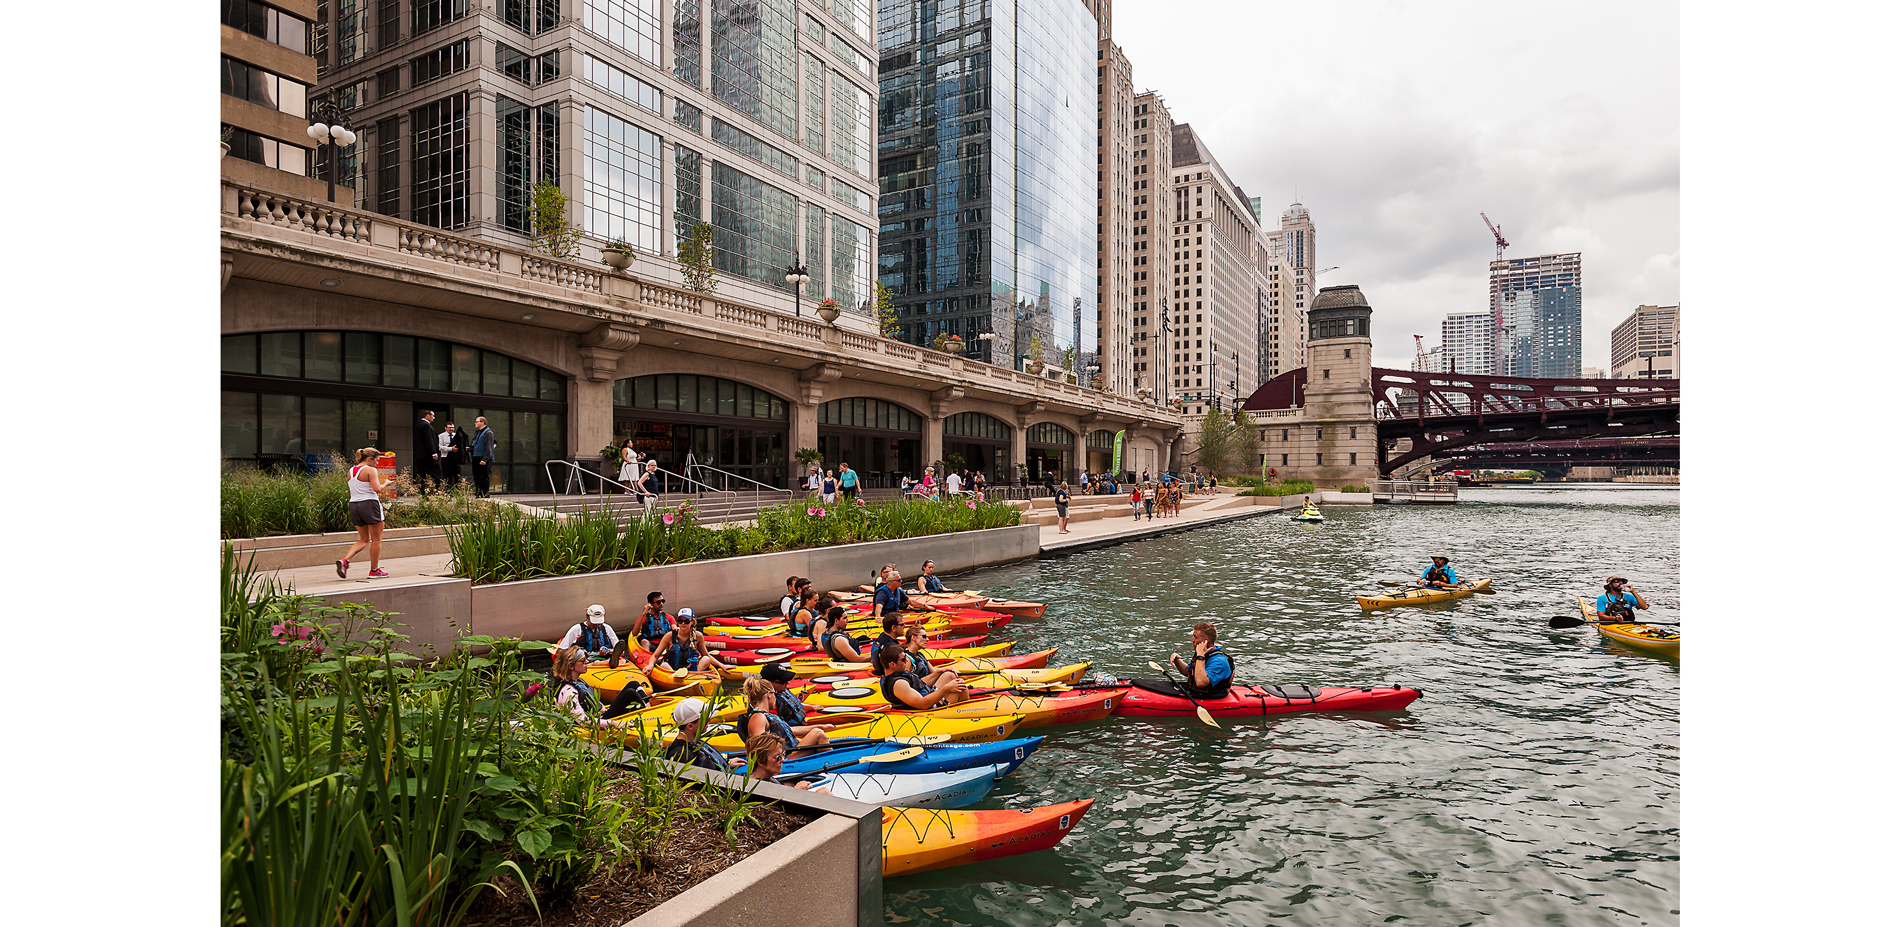 The Cove, which is located between Dearborn and Clark Streets, was inspired by beach landscapes.
                            Kayak rentals and docking for human-powered craft pr…